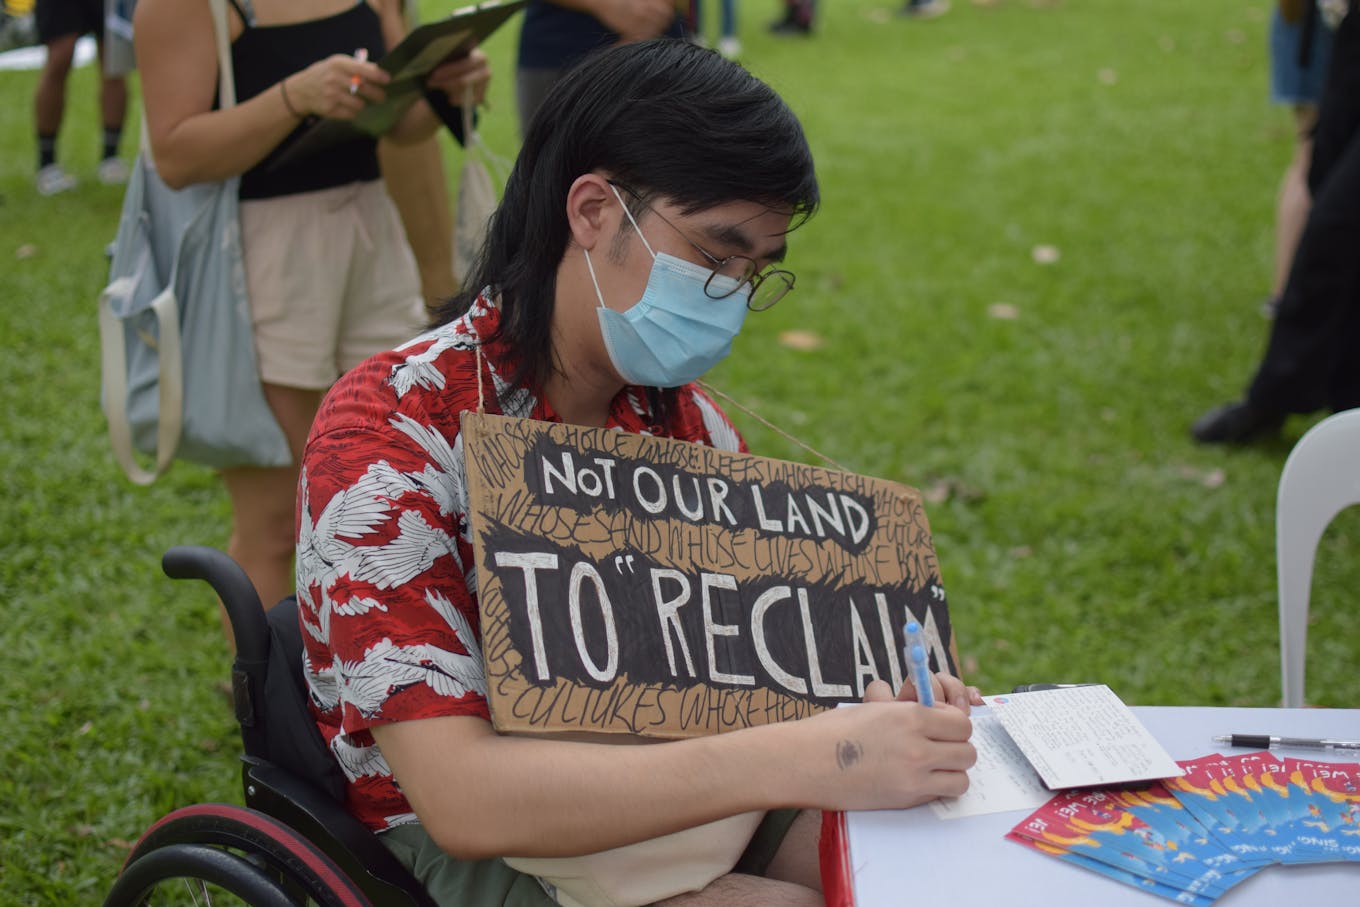 "Not our land to 'reclaim'" - SG Climate Rally